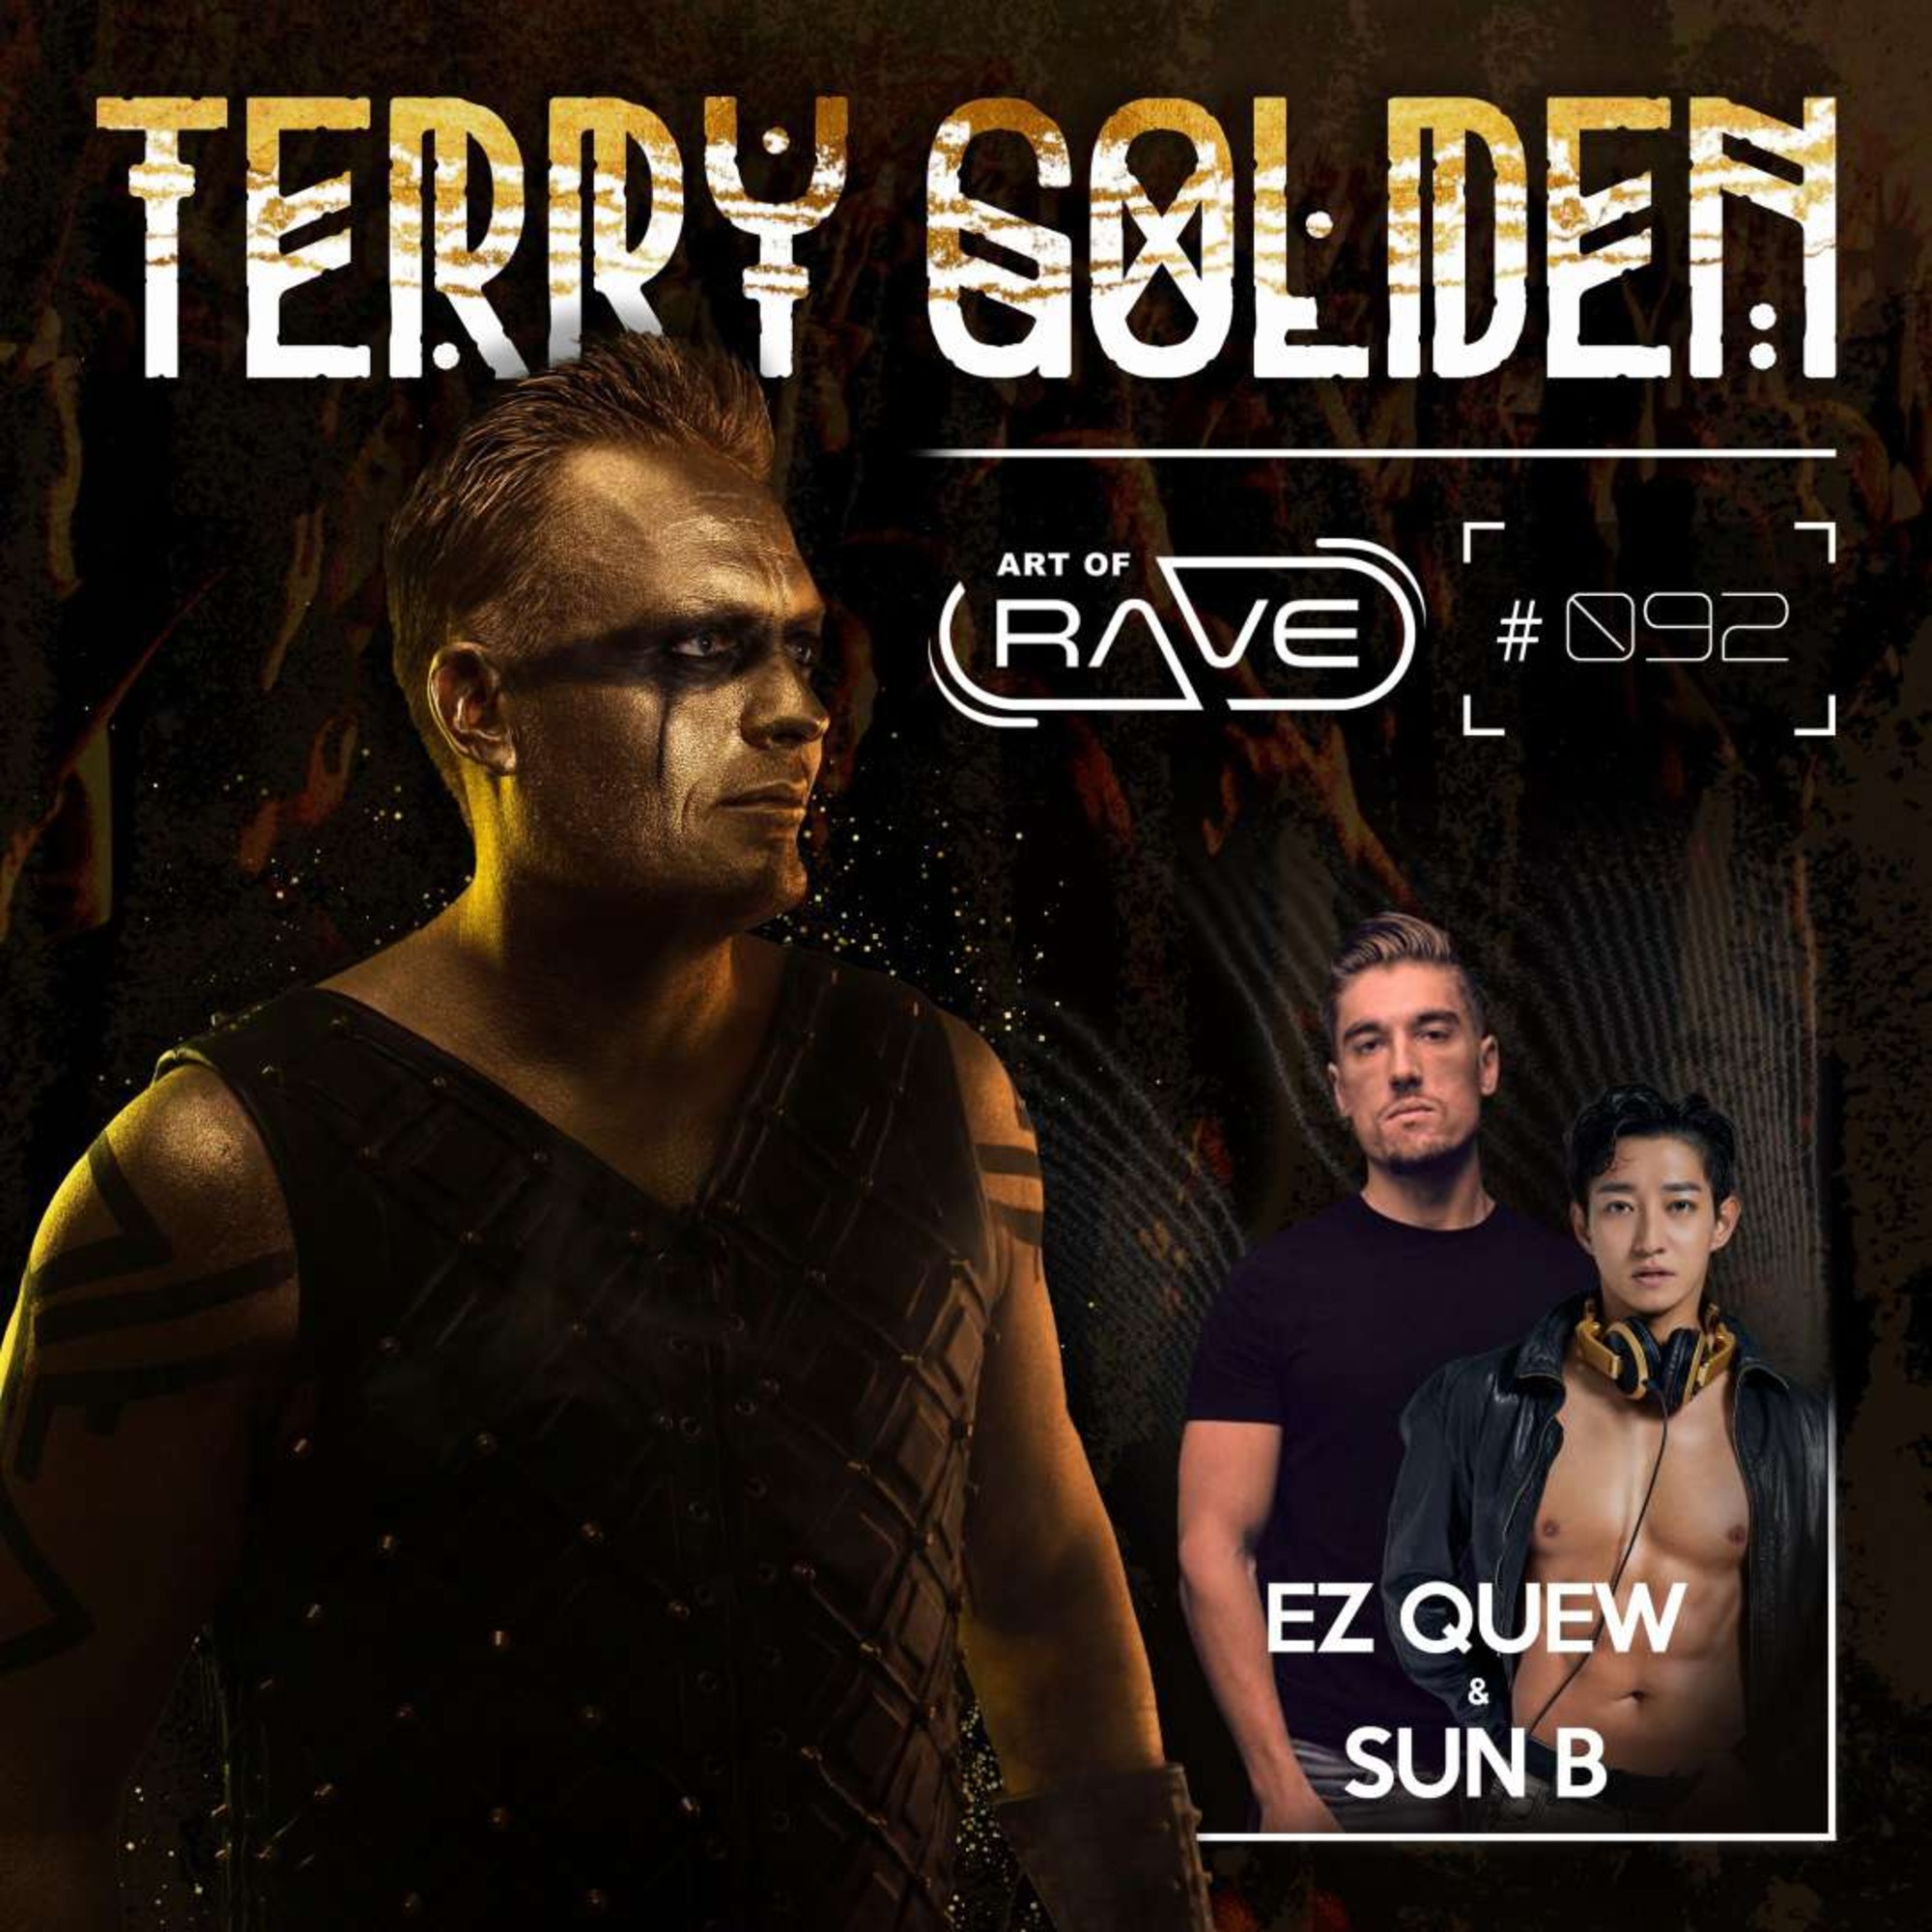 Art for Terry Golden Art Of Rave #92 with Ez Quew & Sun B by Terry Golden with Ez Quew & Sun B